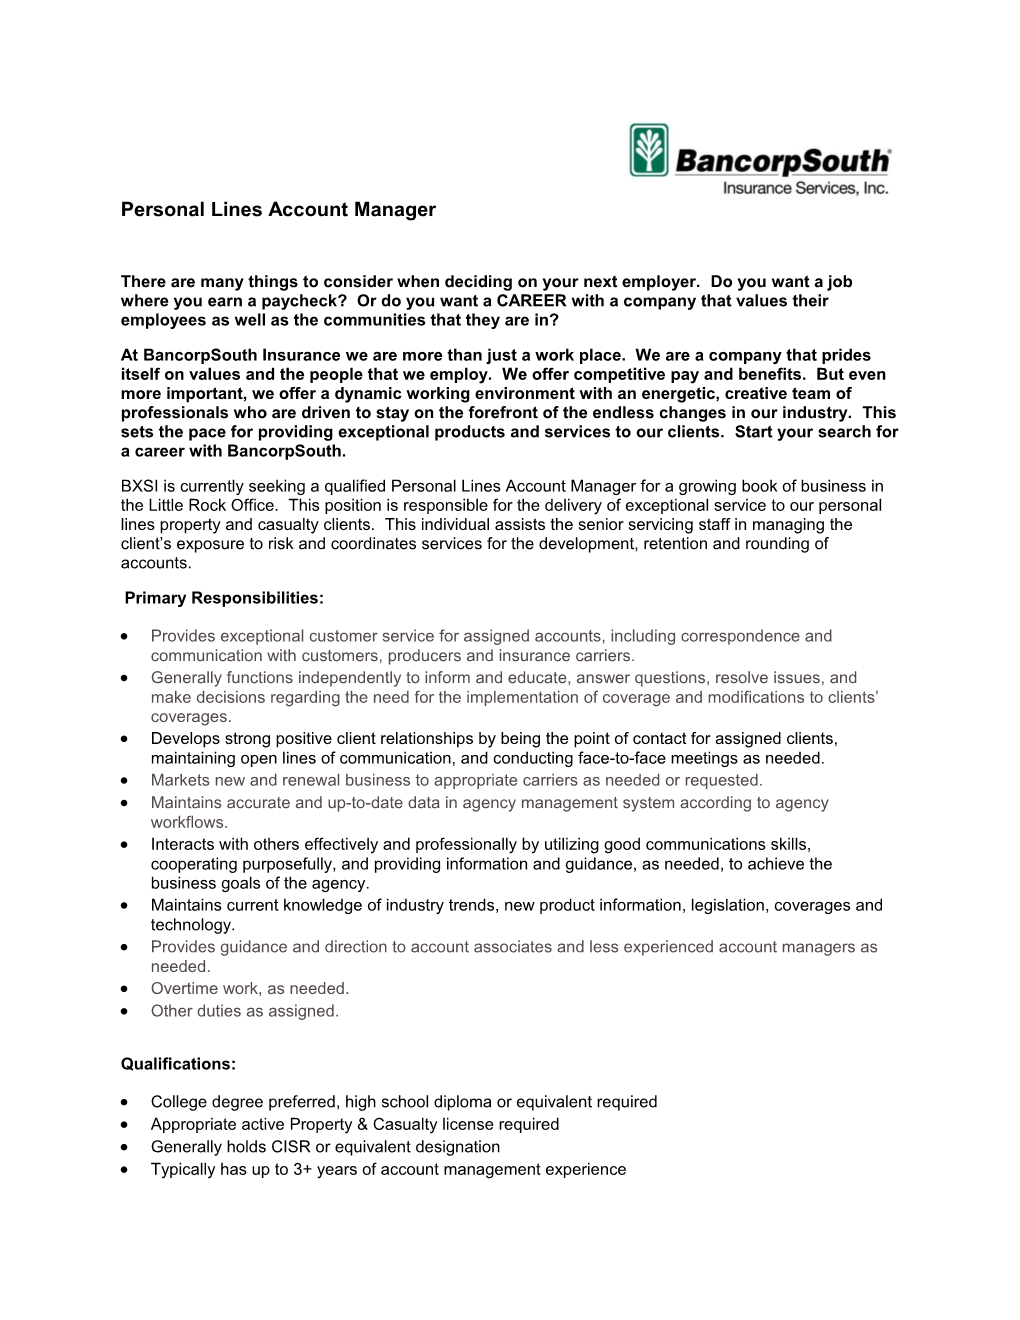 Personal Lines Account Manager